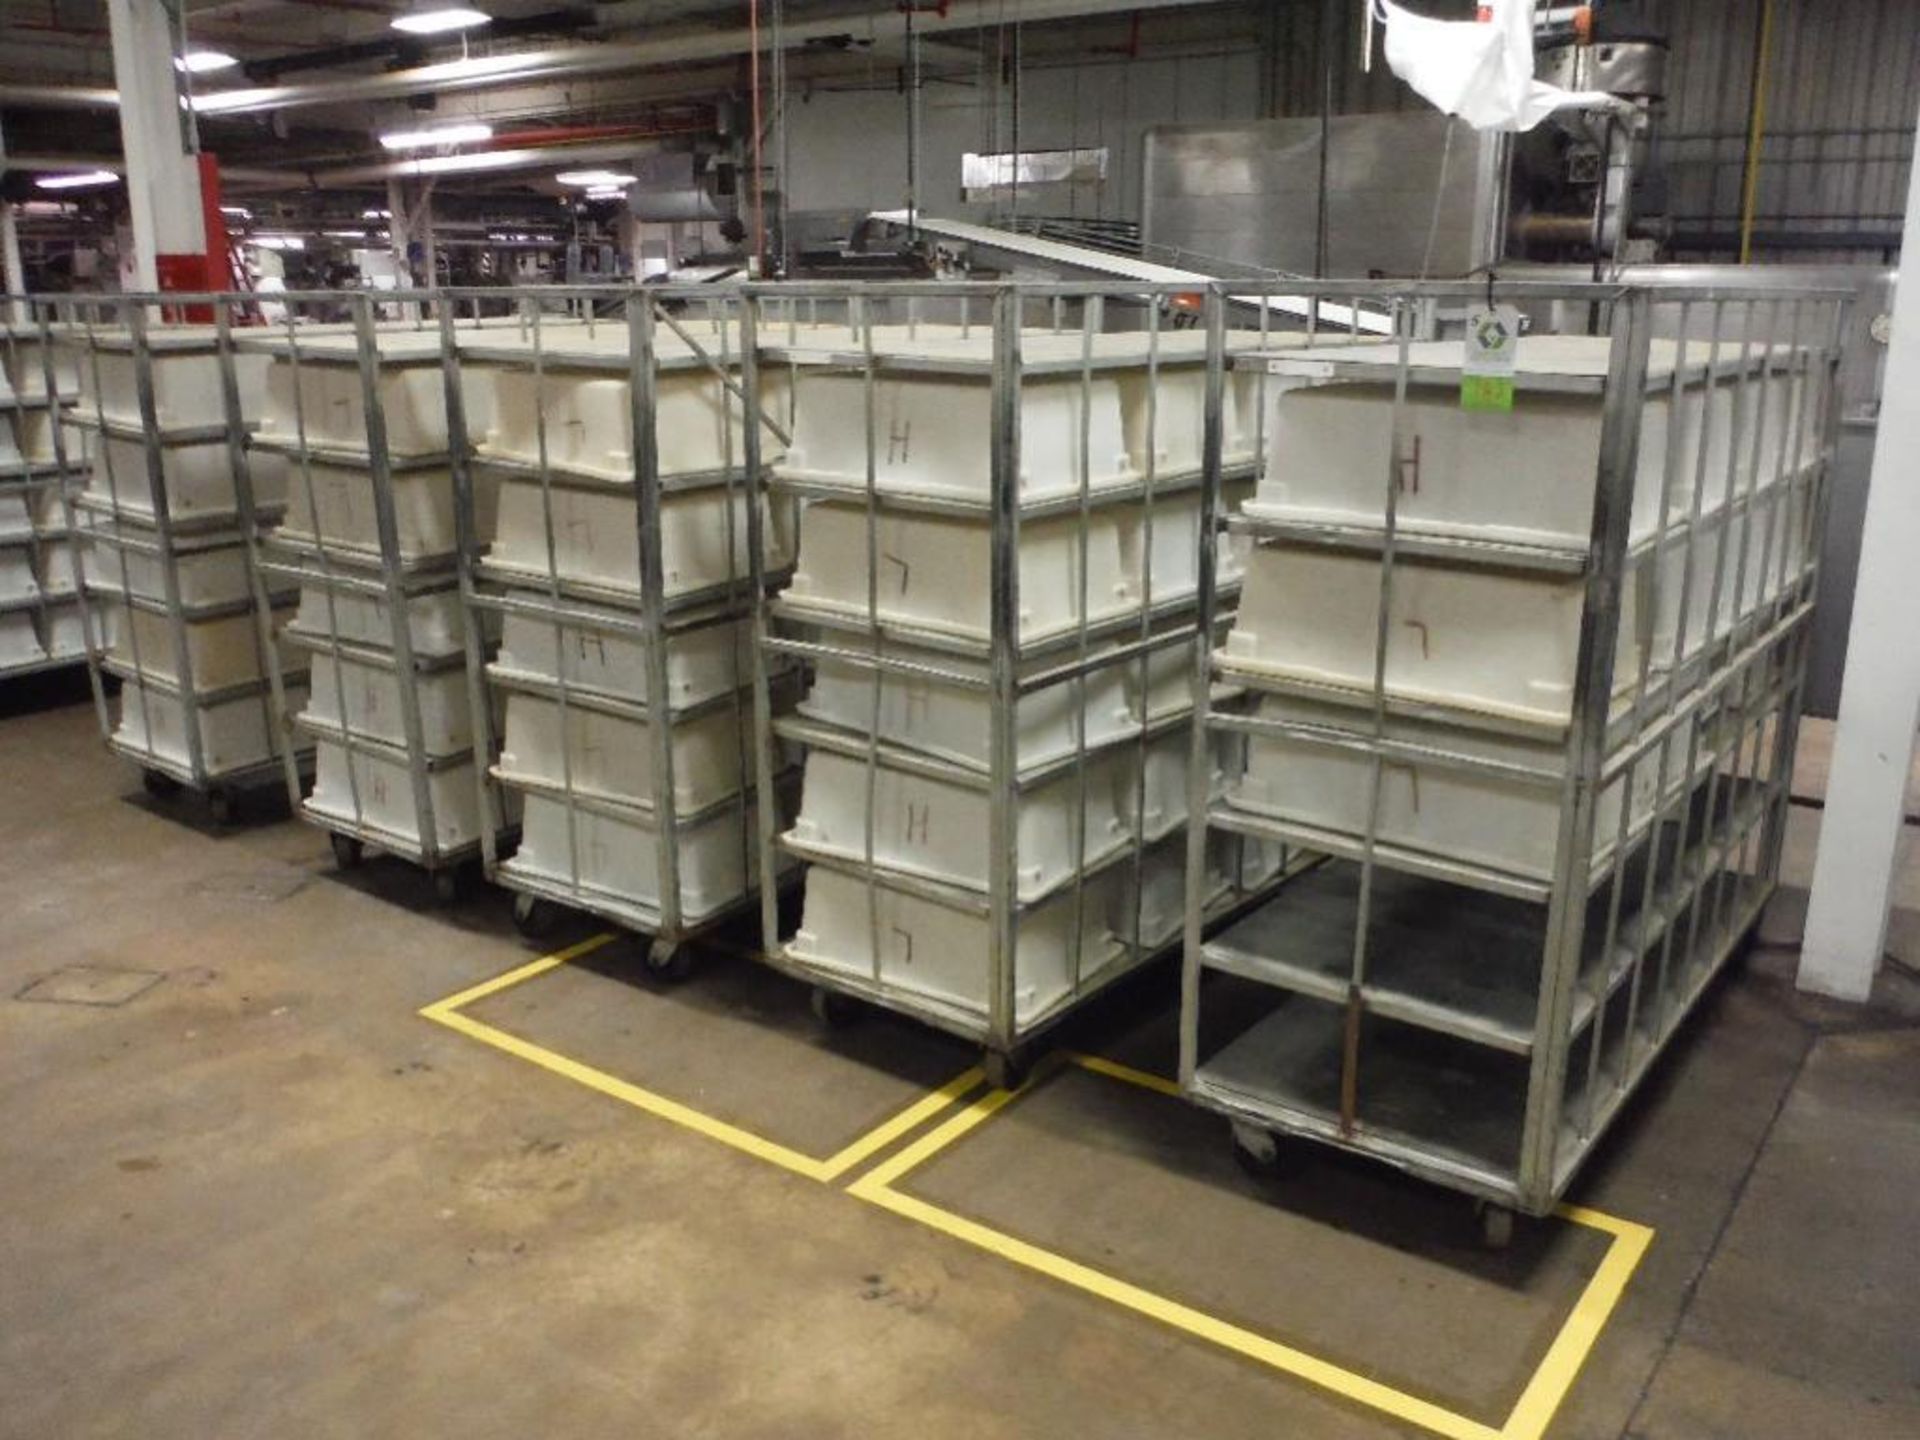 Cumberland galvanized tub carts and tubs, 75 in. long x 28 in. wide x 67 in. tall, 6 shelves, caster - Image 3 of 3